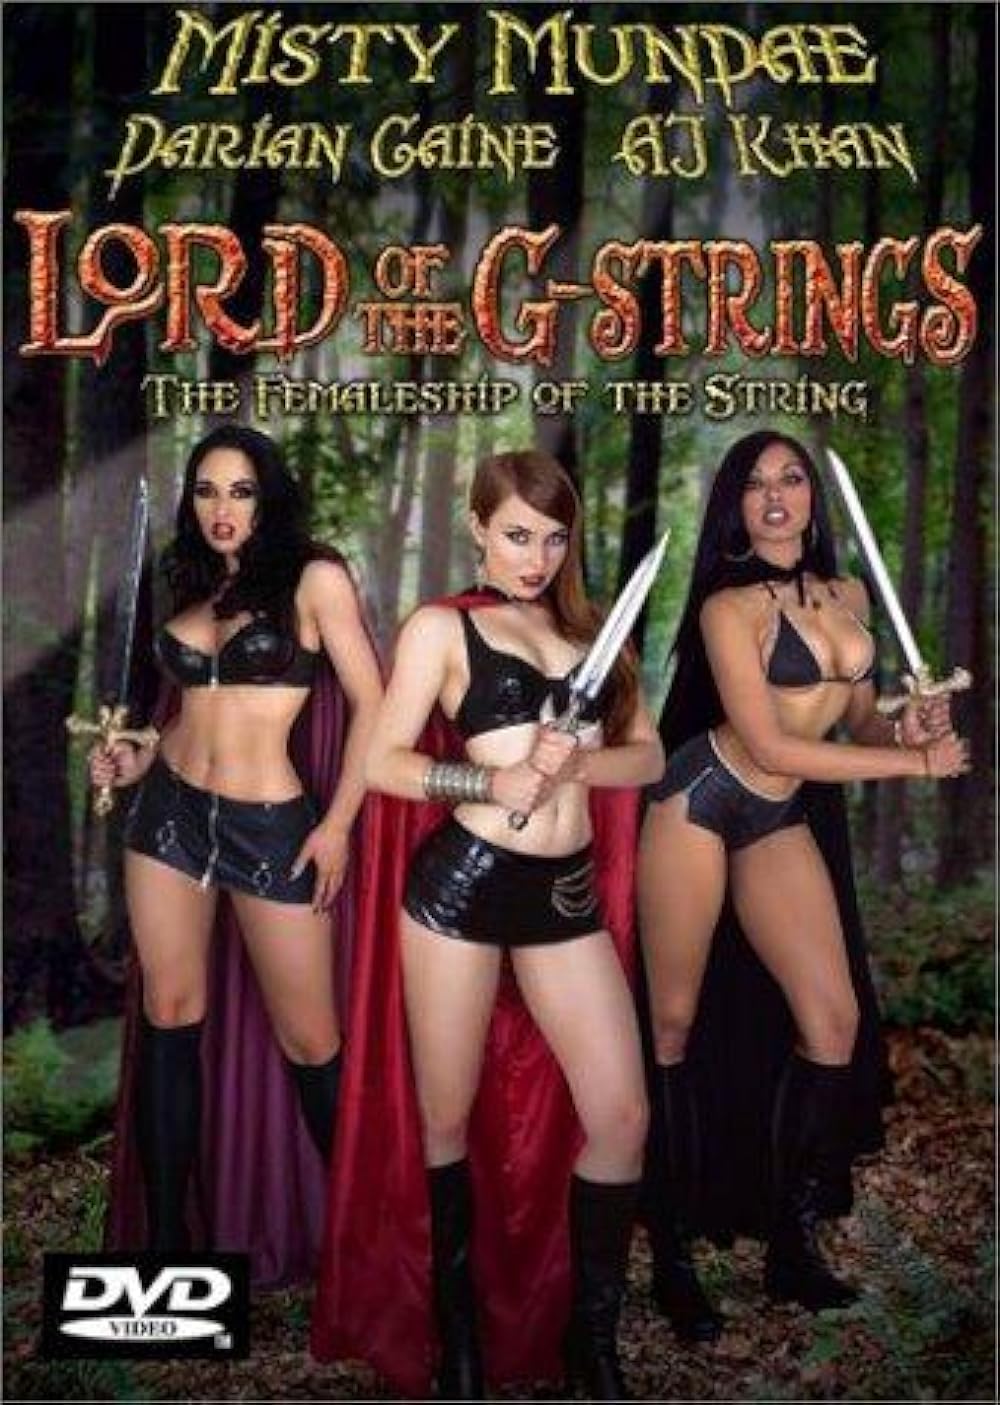 abhishek bangale recommends Lord Of The Gstrings